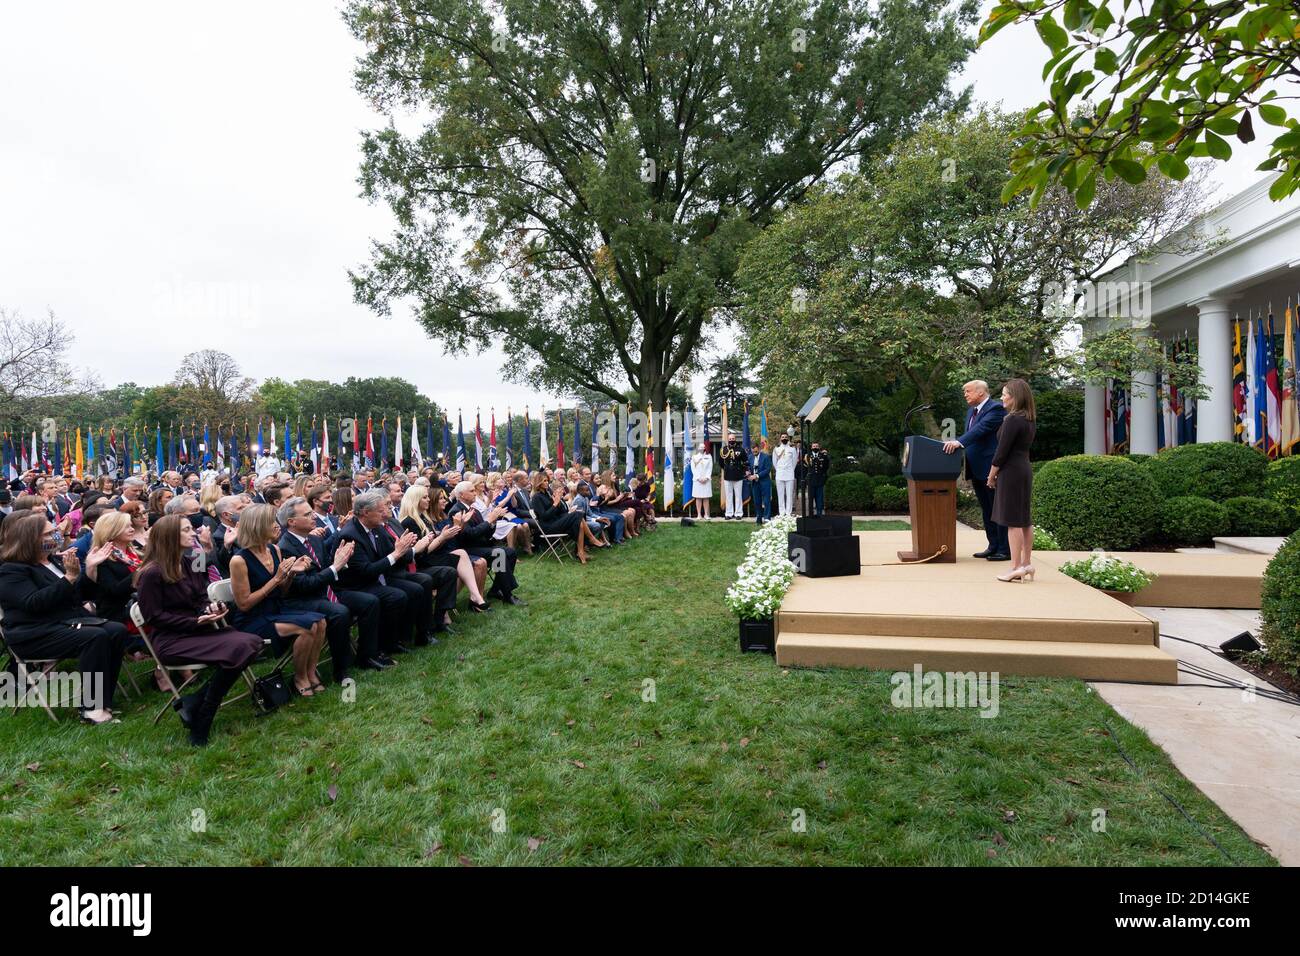 President Trump Nominates Judge Amy Coney Barrett for Associate Justice of the U.S. Supreme Court. President Donald J. Trump announces Judge Amy Coney Barrett as his nominee for Associate Justice of the Supreme Court of the United States Saturday, Sept. 26, 2020, in the Rose Garden of the White House. Stock Photo